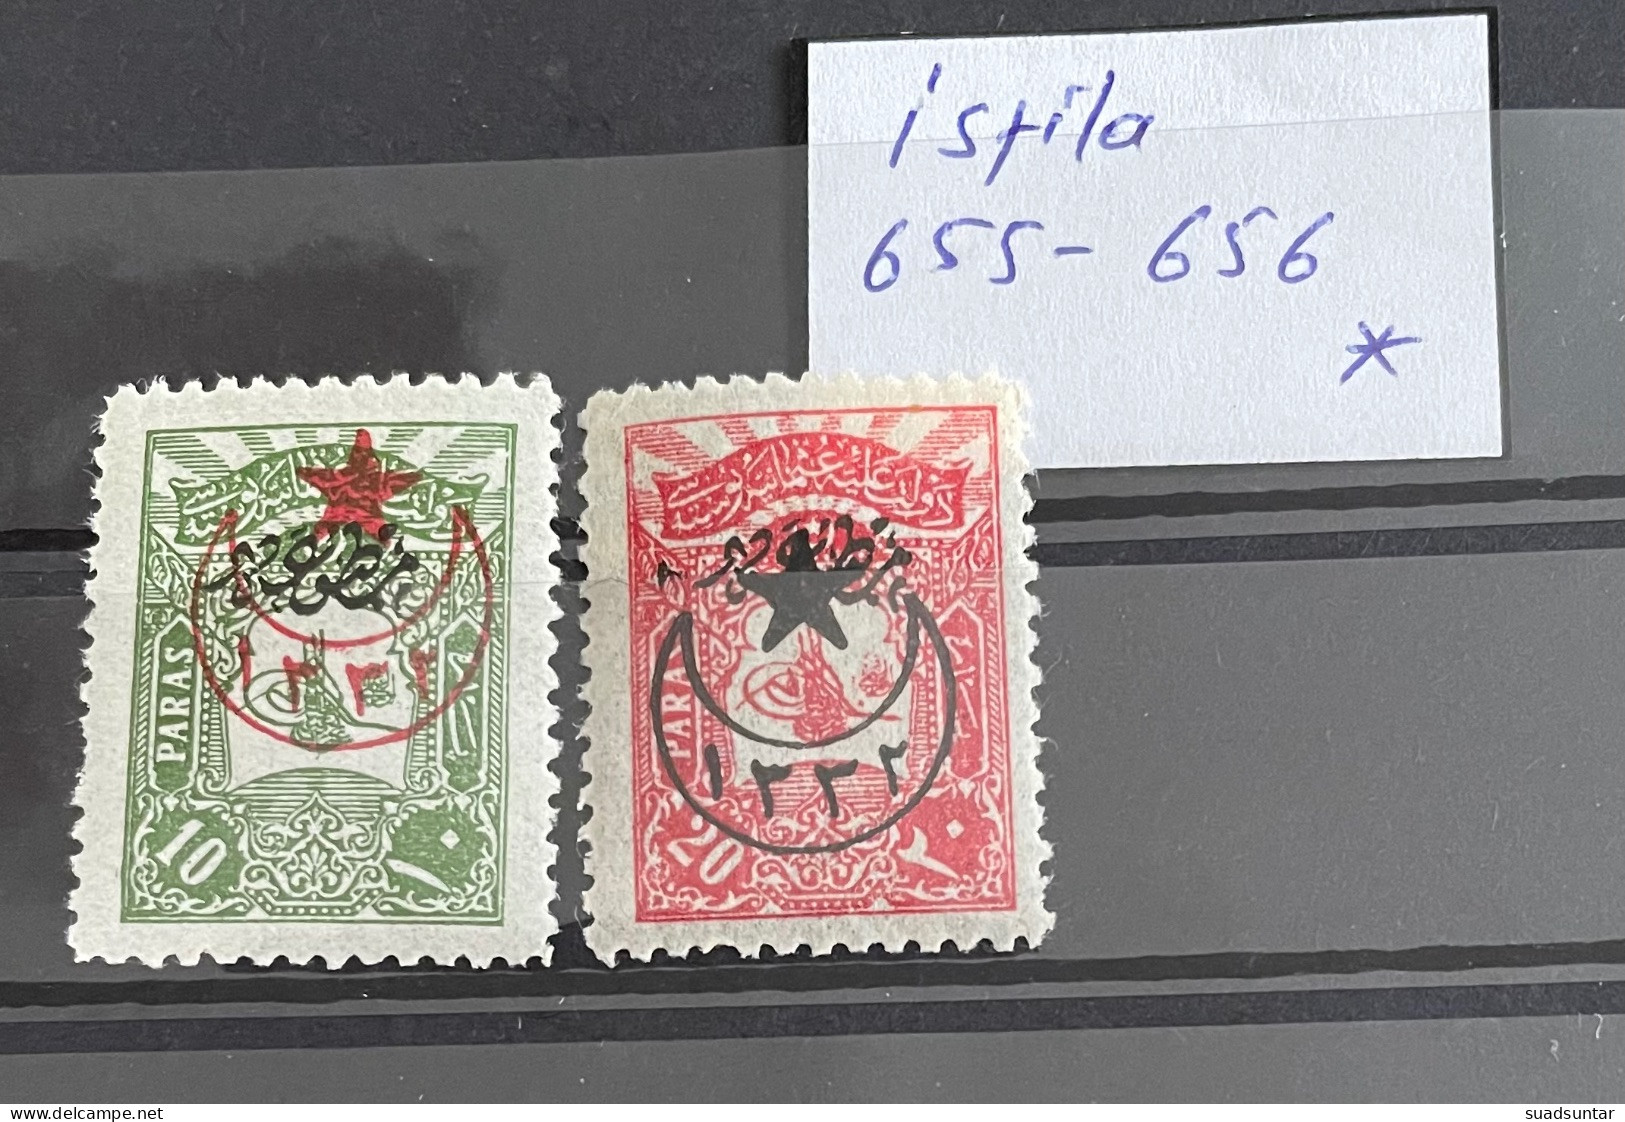 1916 5 Star Overprinted Stamps MH Isfila 655-656 High Values - Neufs